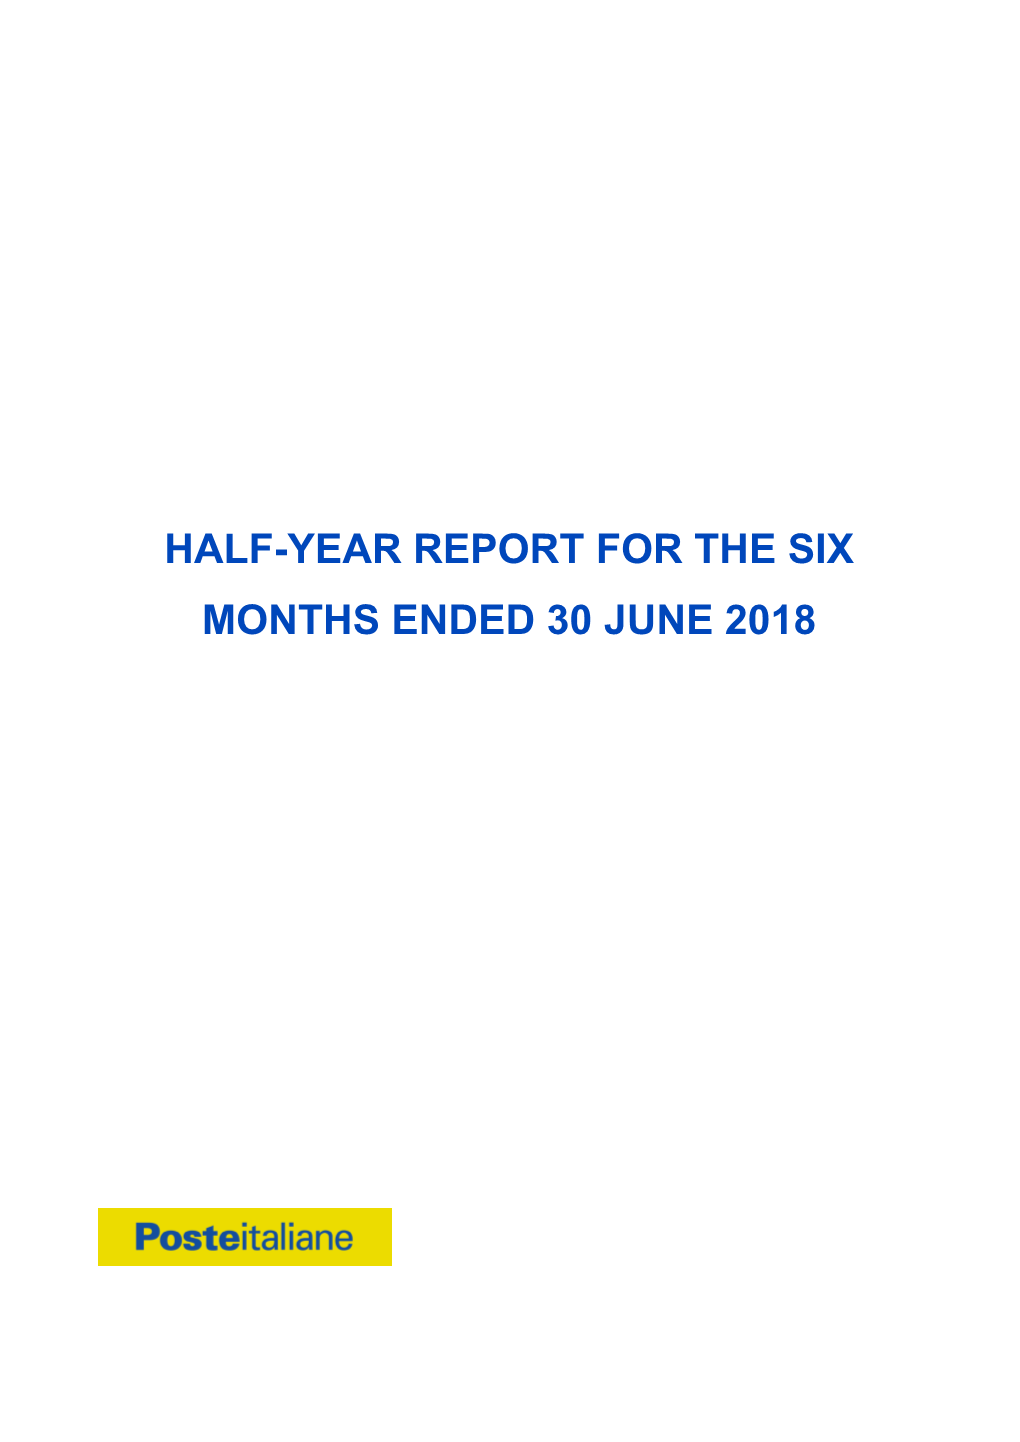 Half-Year Report for the Six Months Ended 30 June 2018